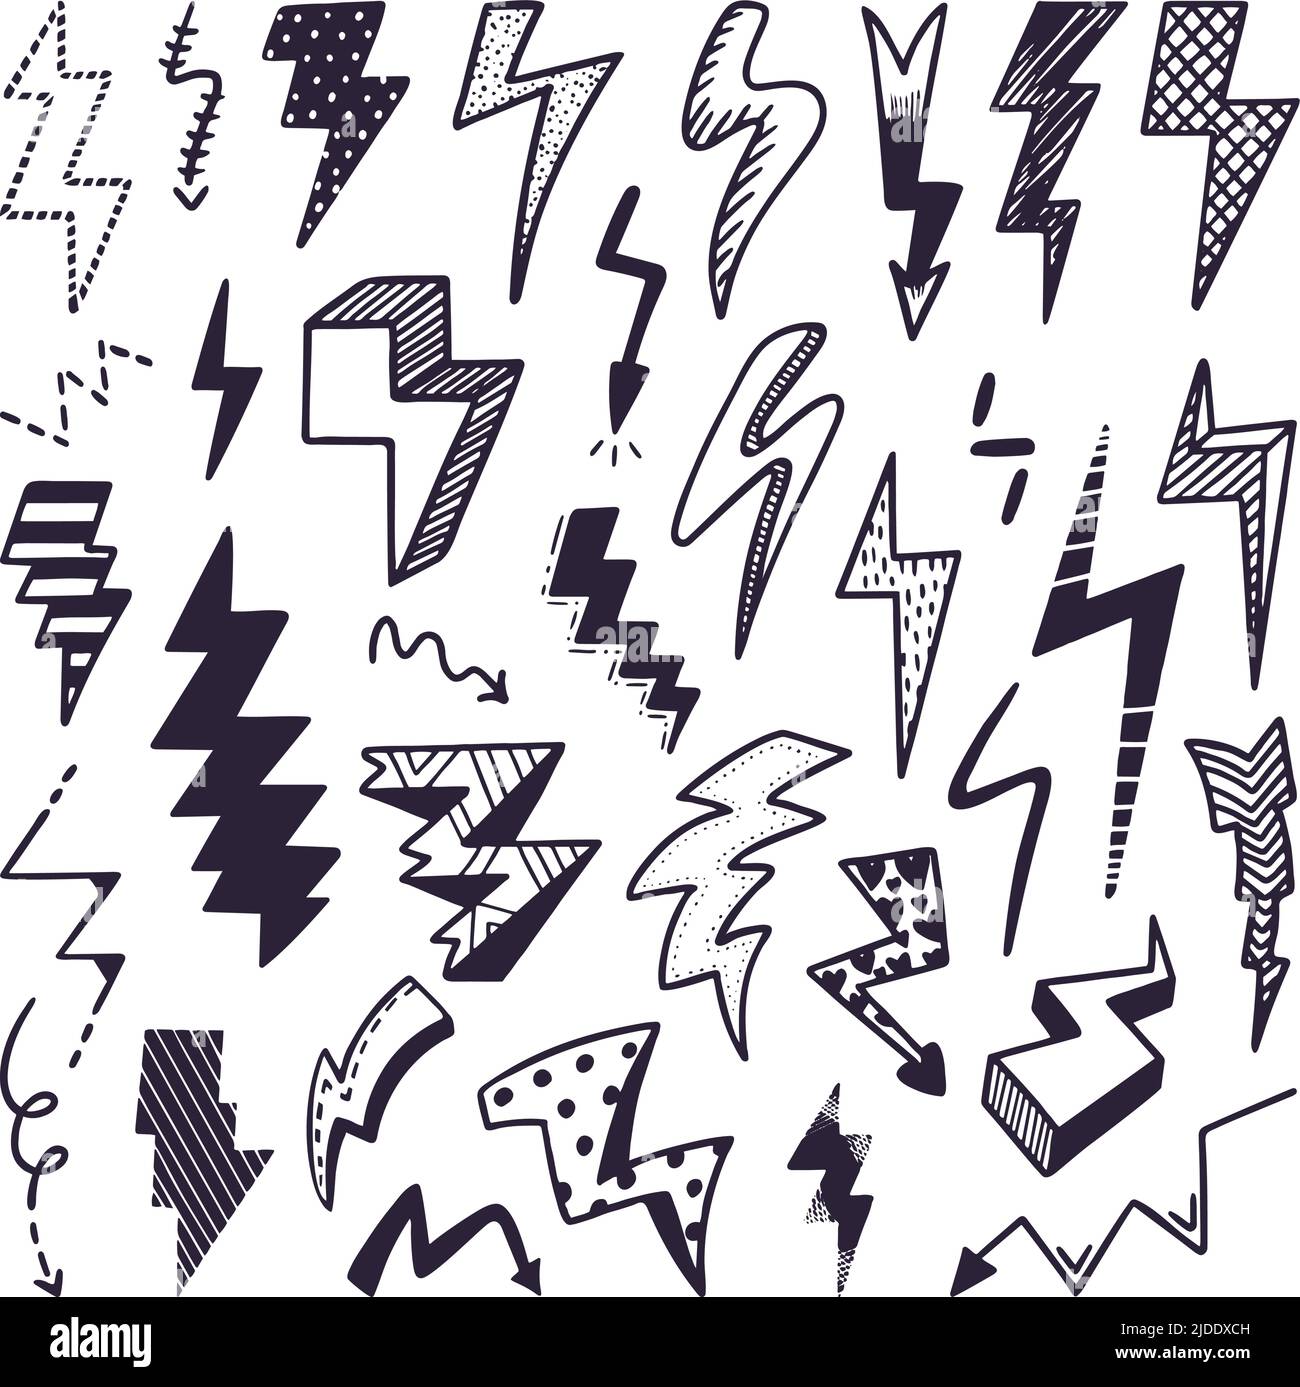 Sketch lightning. Thunder doodle, bolts electricity scribble elements. Isolated light or speed doodles graphic design. Danger symbol neoteric vector Stock Vector